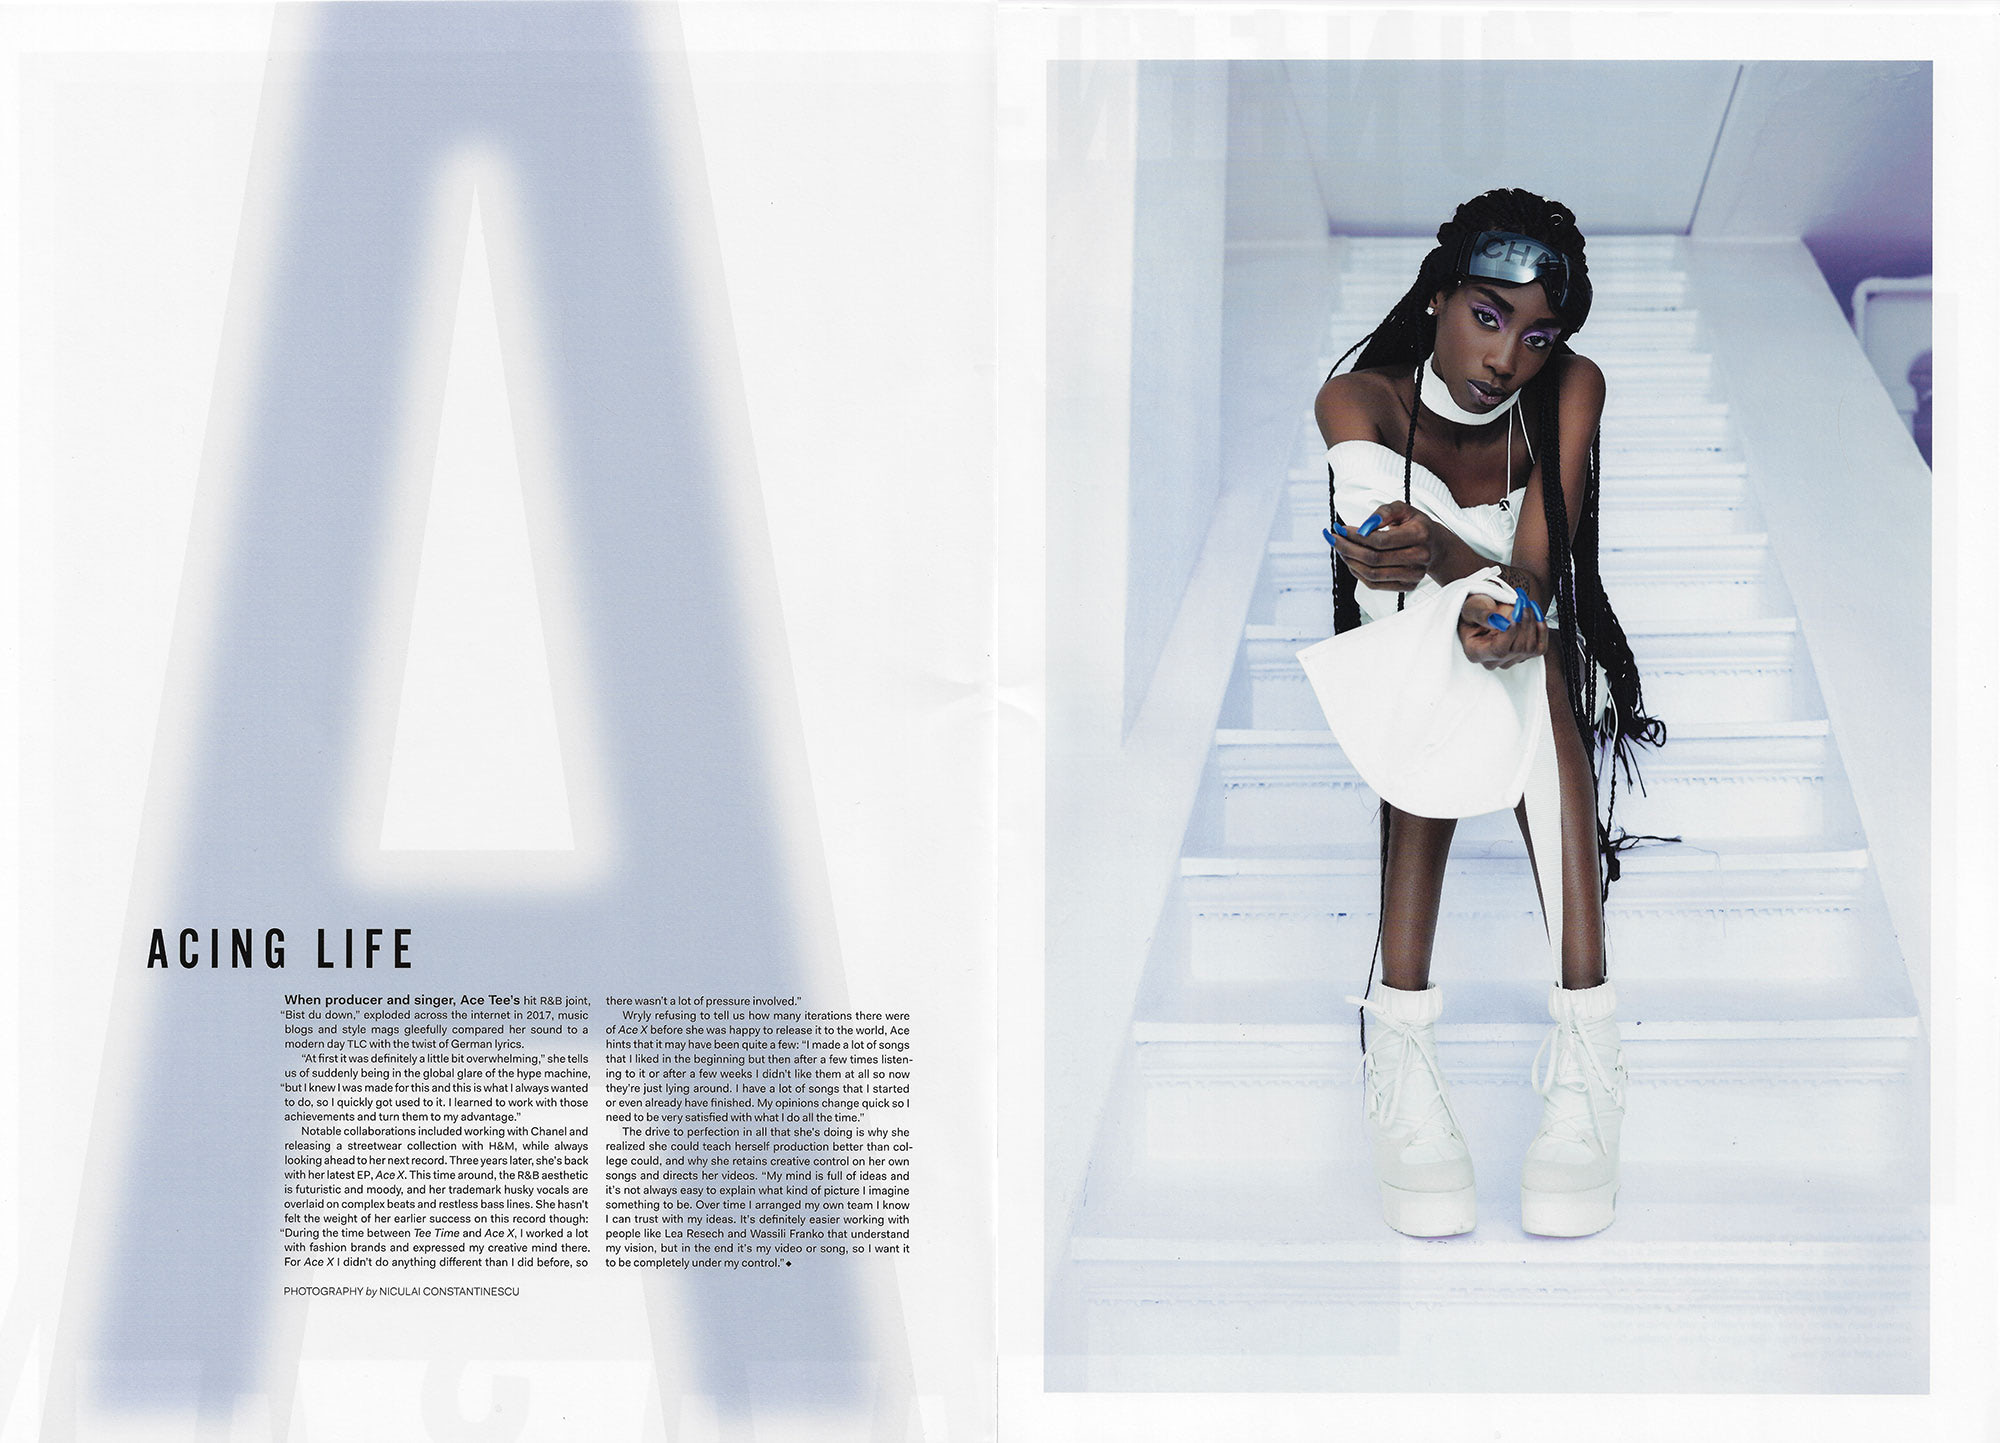 scan of interior spread with large icy A on the left and photograph of young black woman in a ahite outfit sitting on white stairs